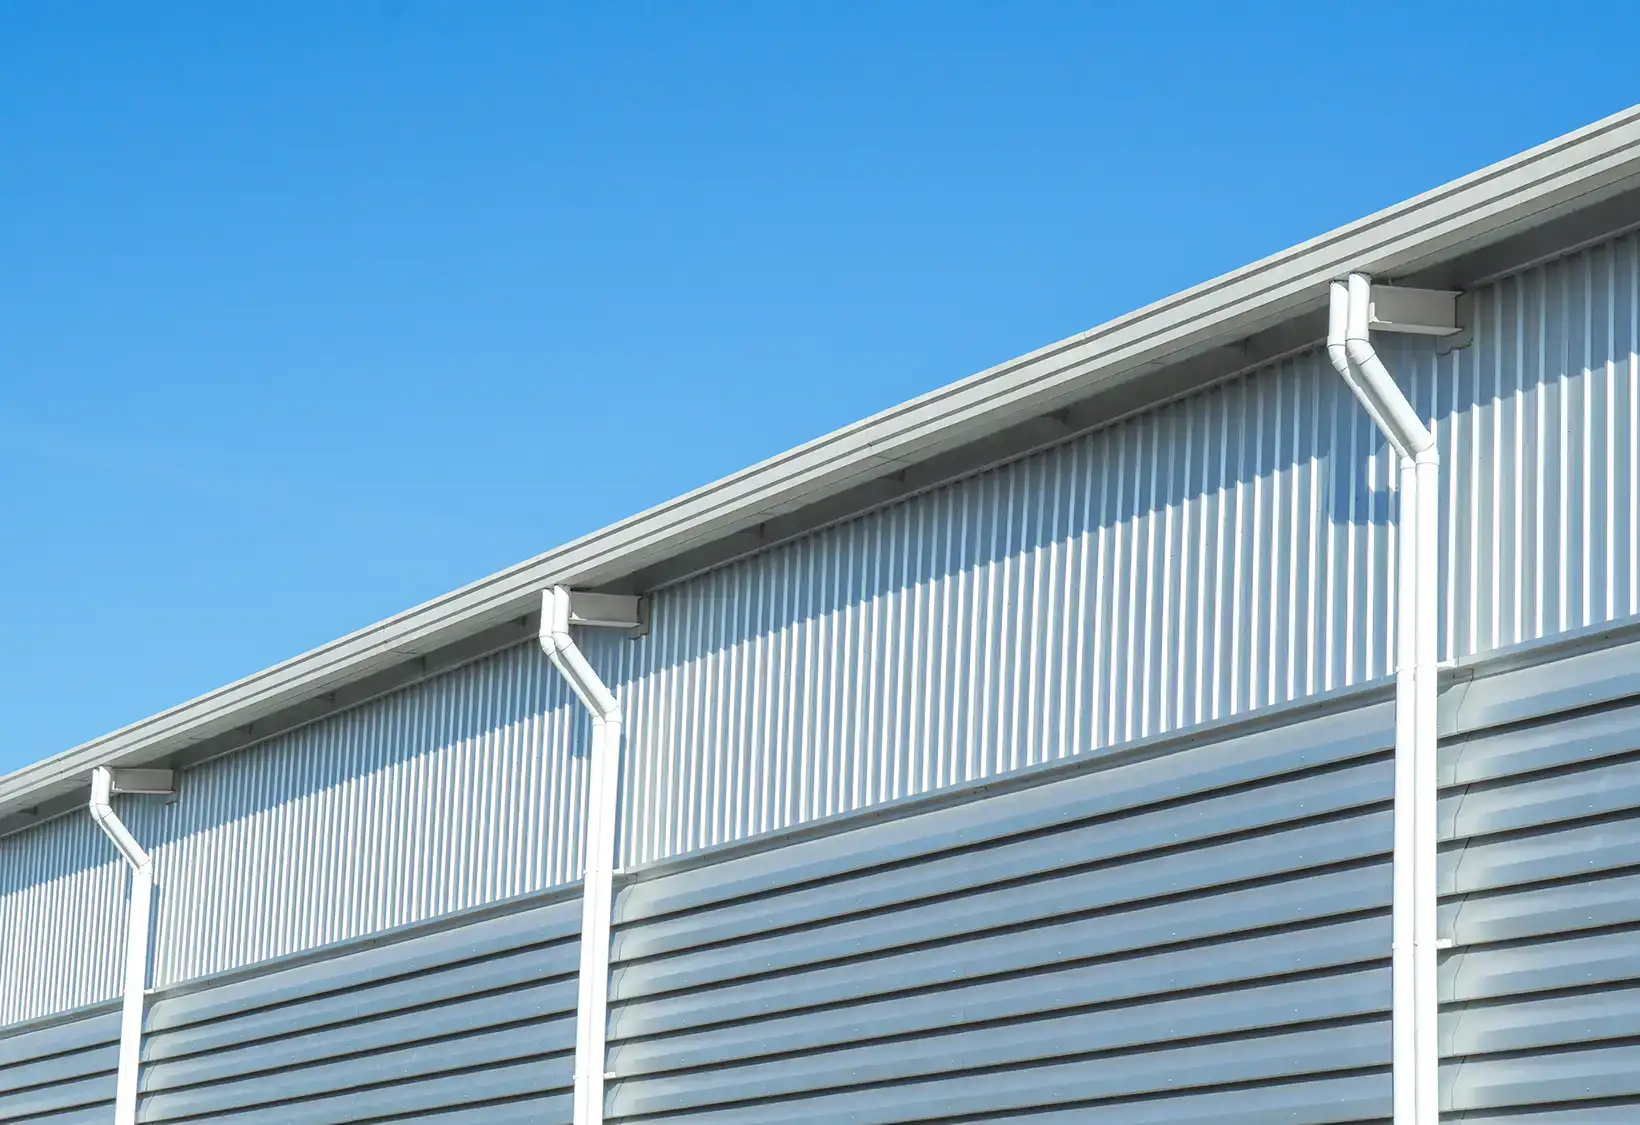 Commercial gutter system for large warehouse - Collinsville, IL